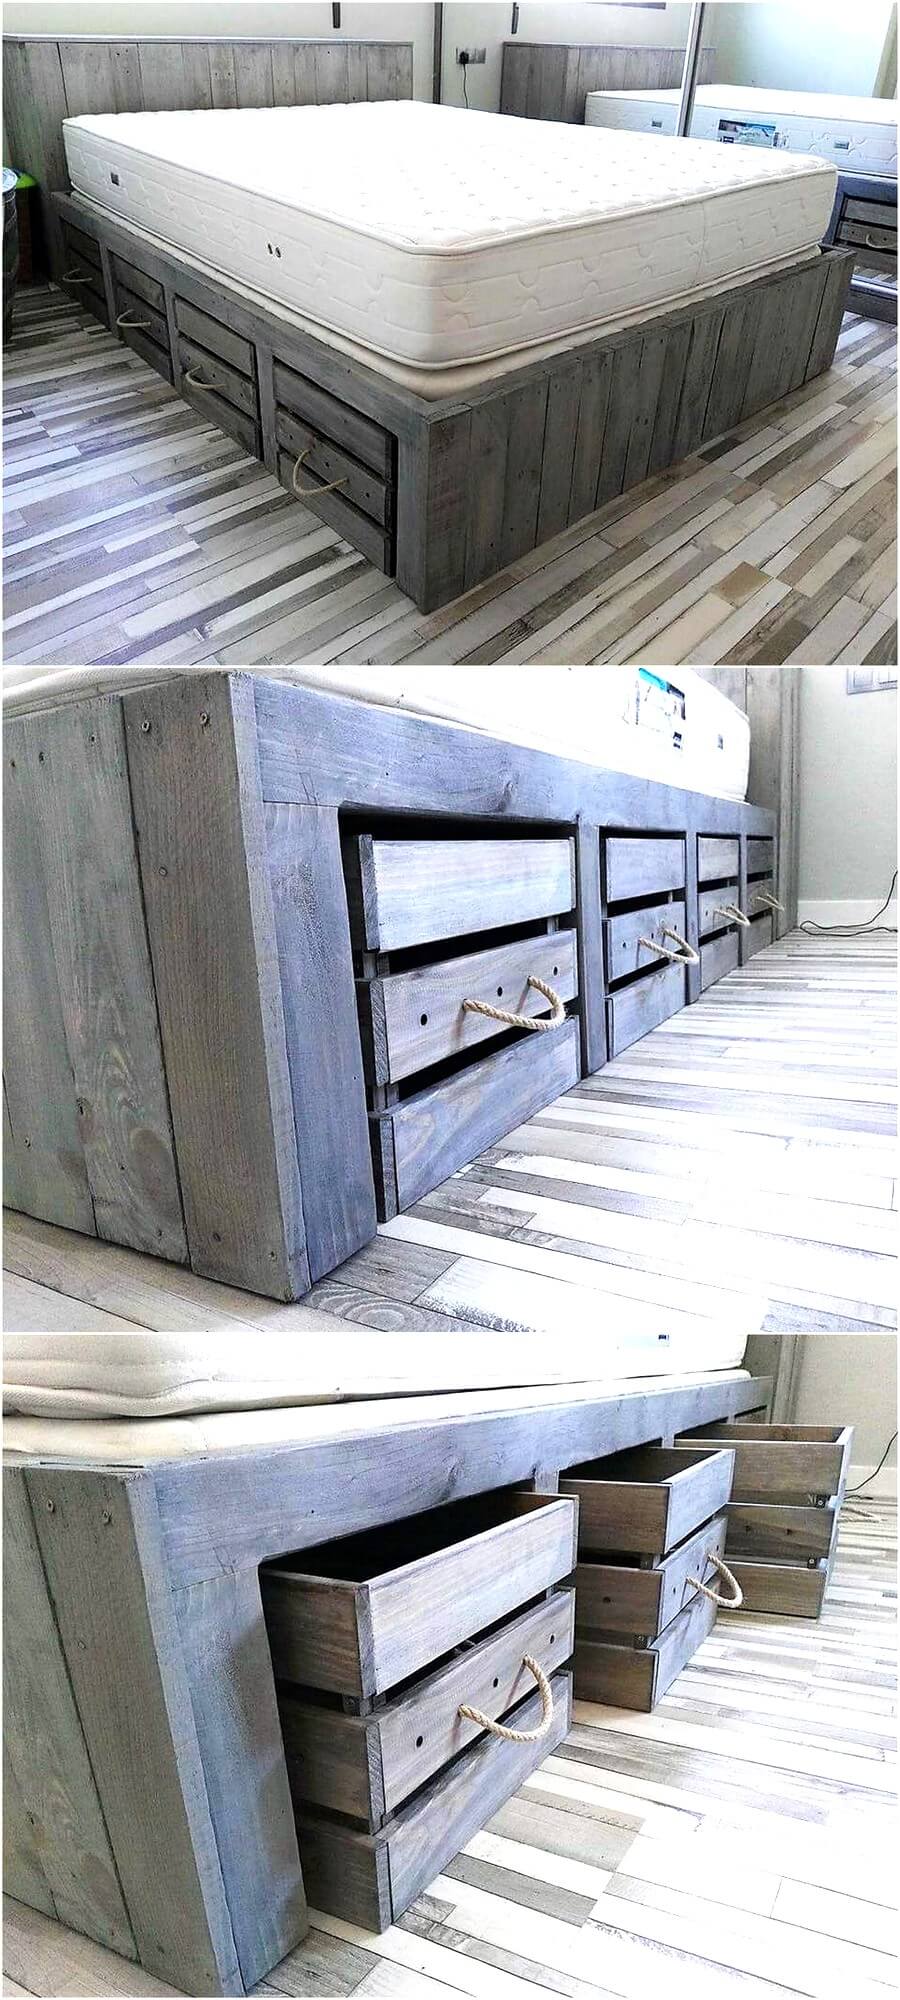 Rustic Look Giant Pallet Bed With Storage